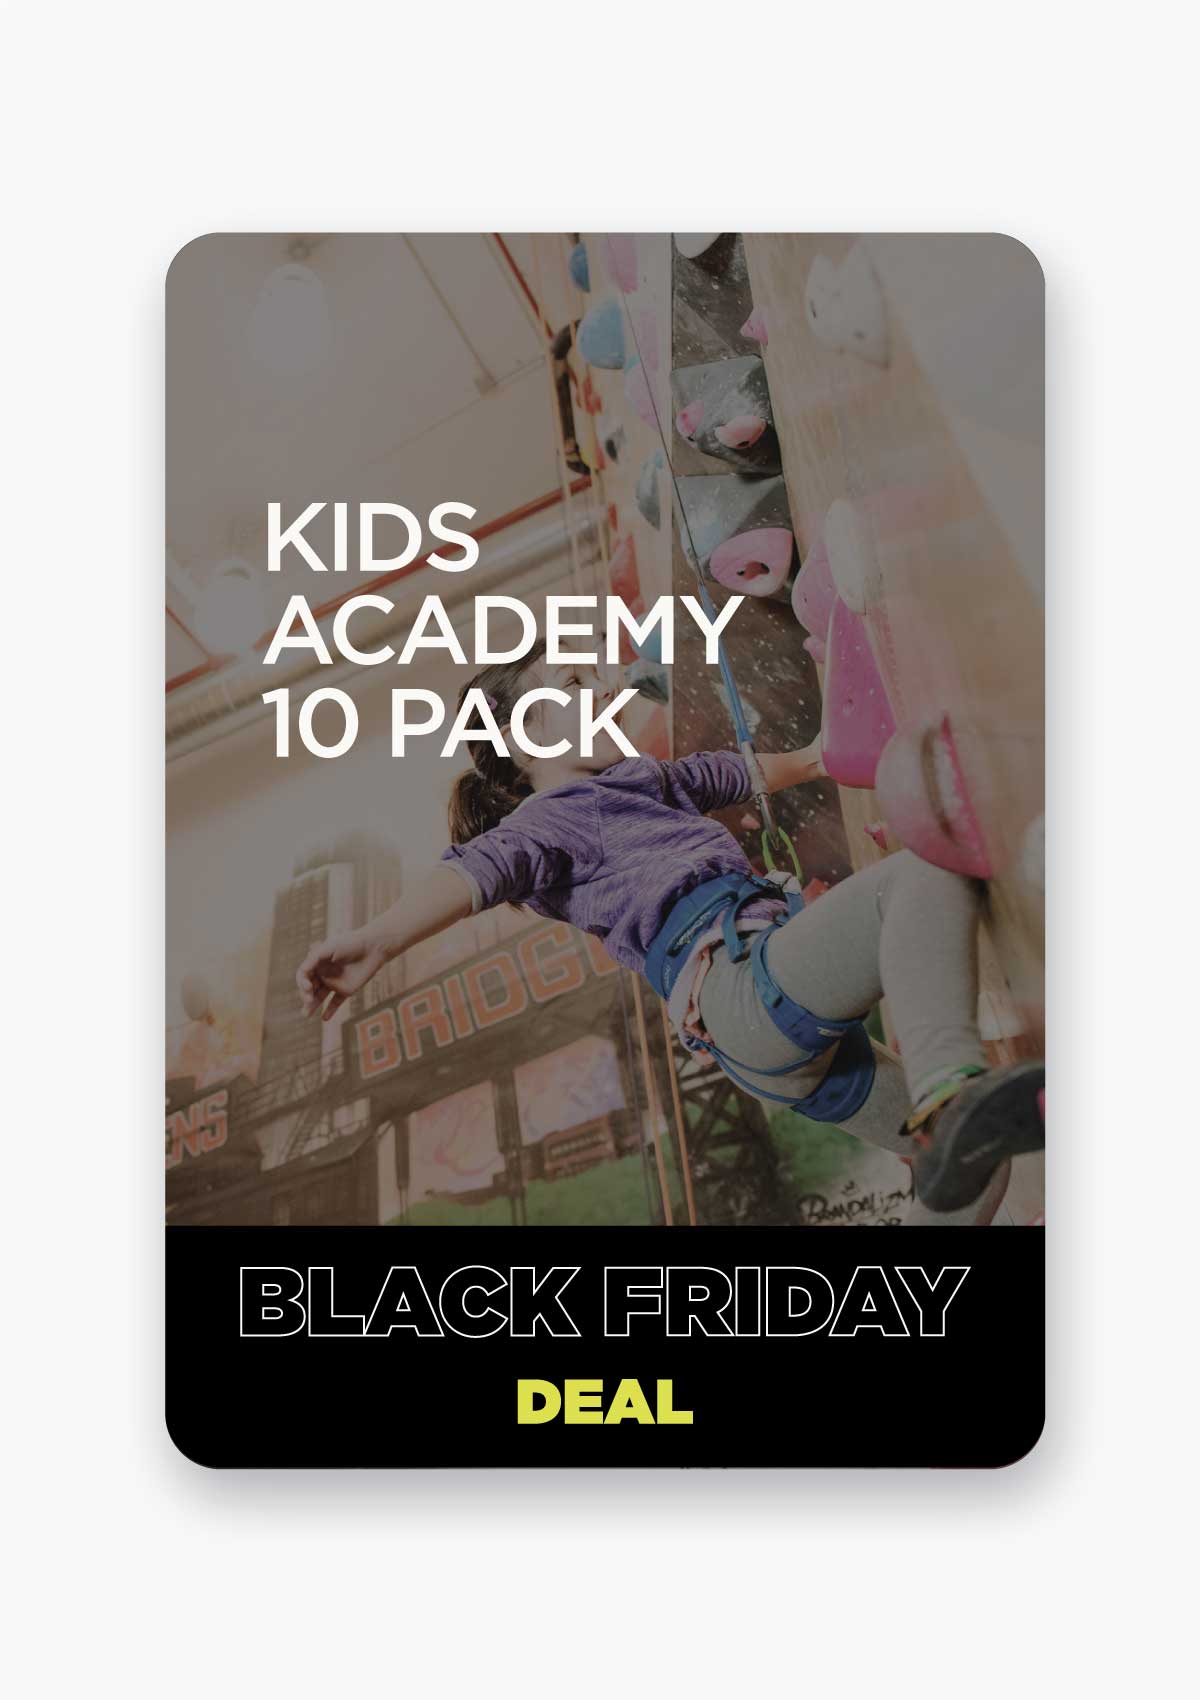 KIDS ACADEMY 10 PACK | EARLY ACCESS